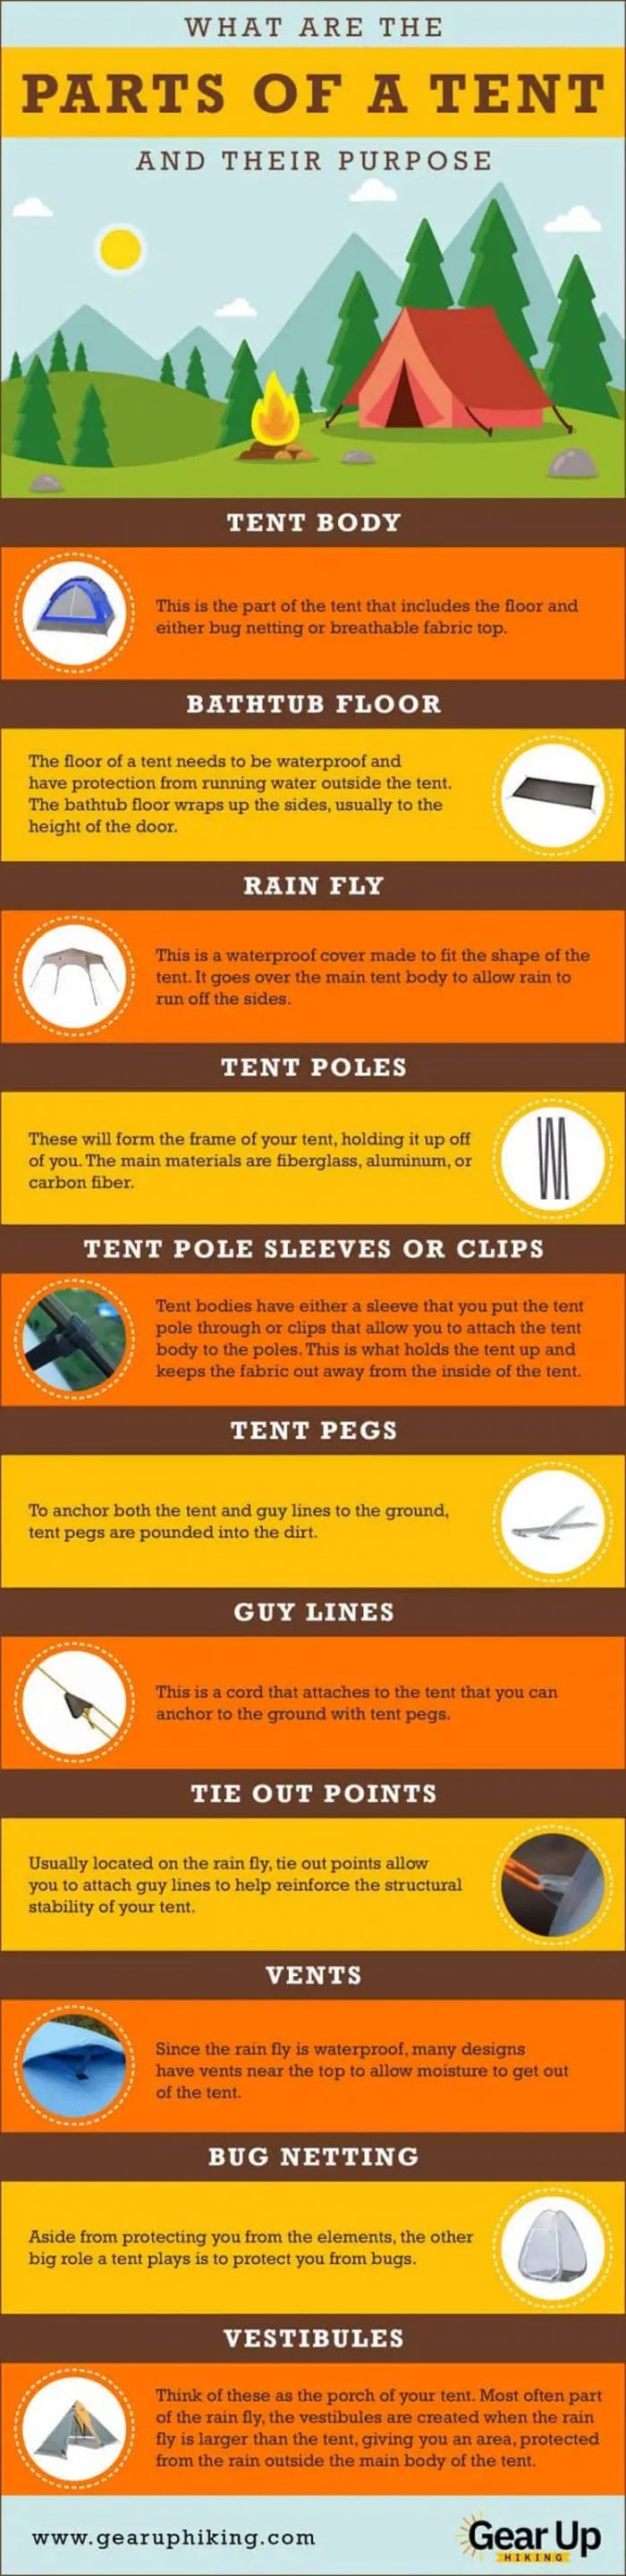 Parts of Tent and their purpose